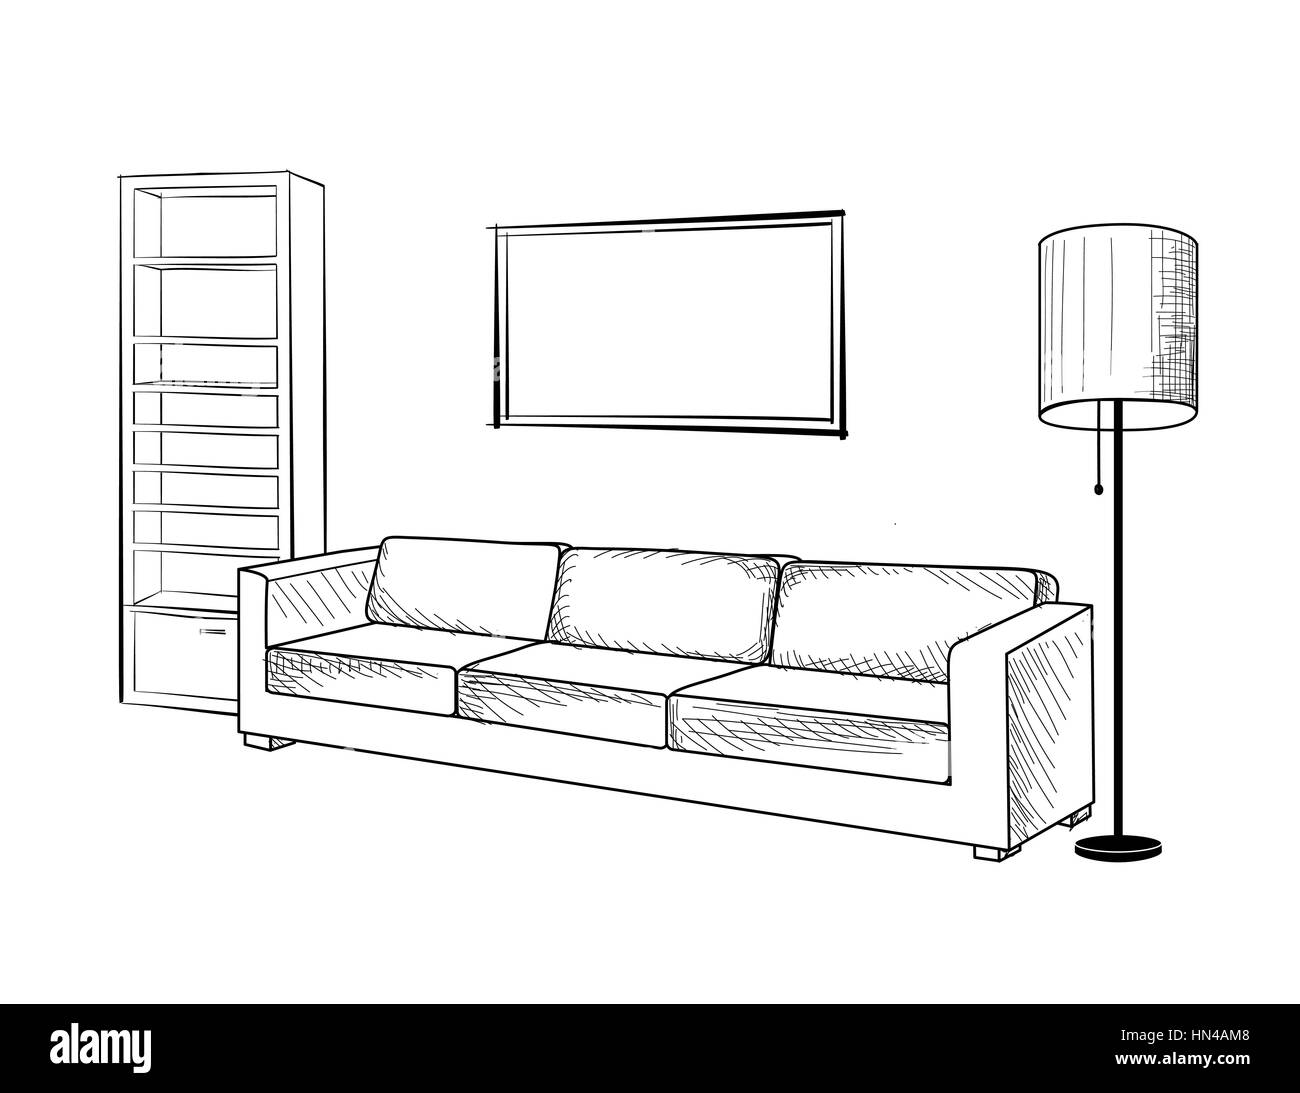 Interior furniture with sofa, floor lamp, book shelf, books and picture on the wall. Living room hnd drawing design. Stock Vector